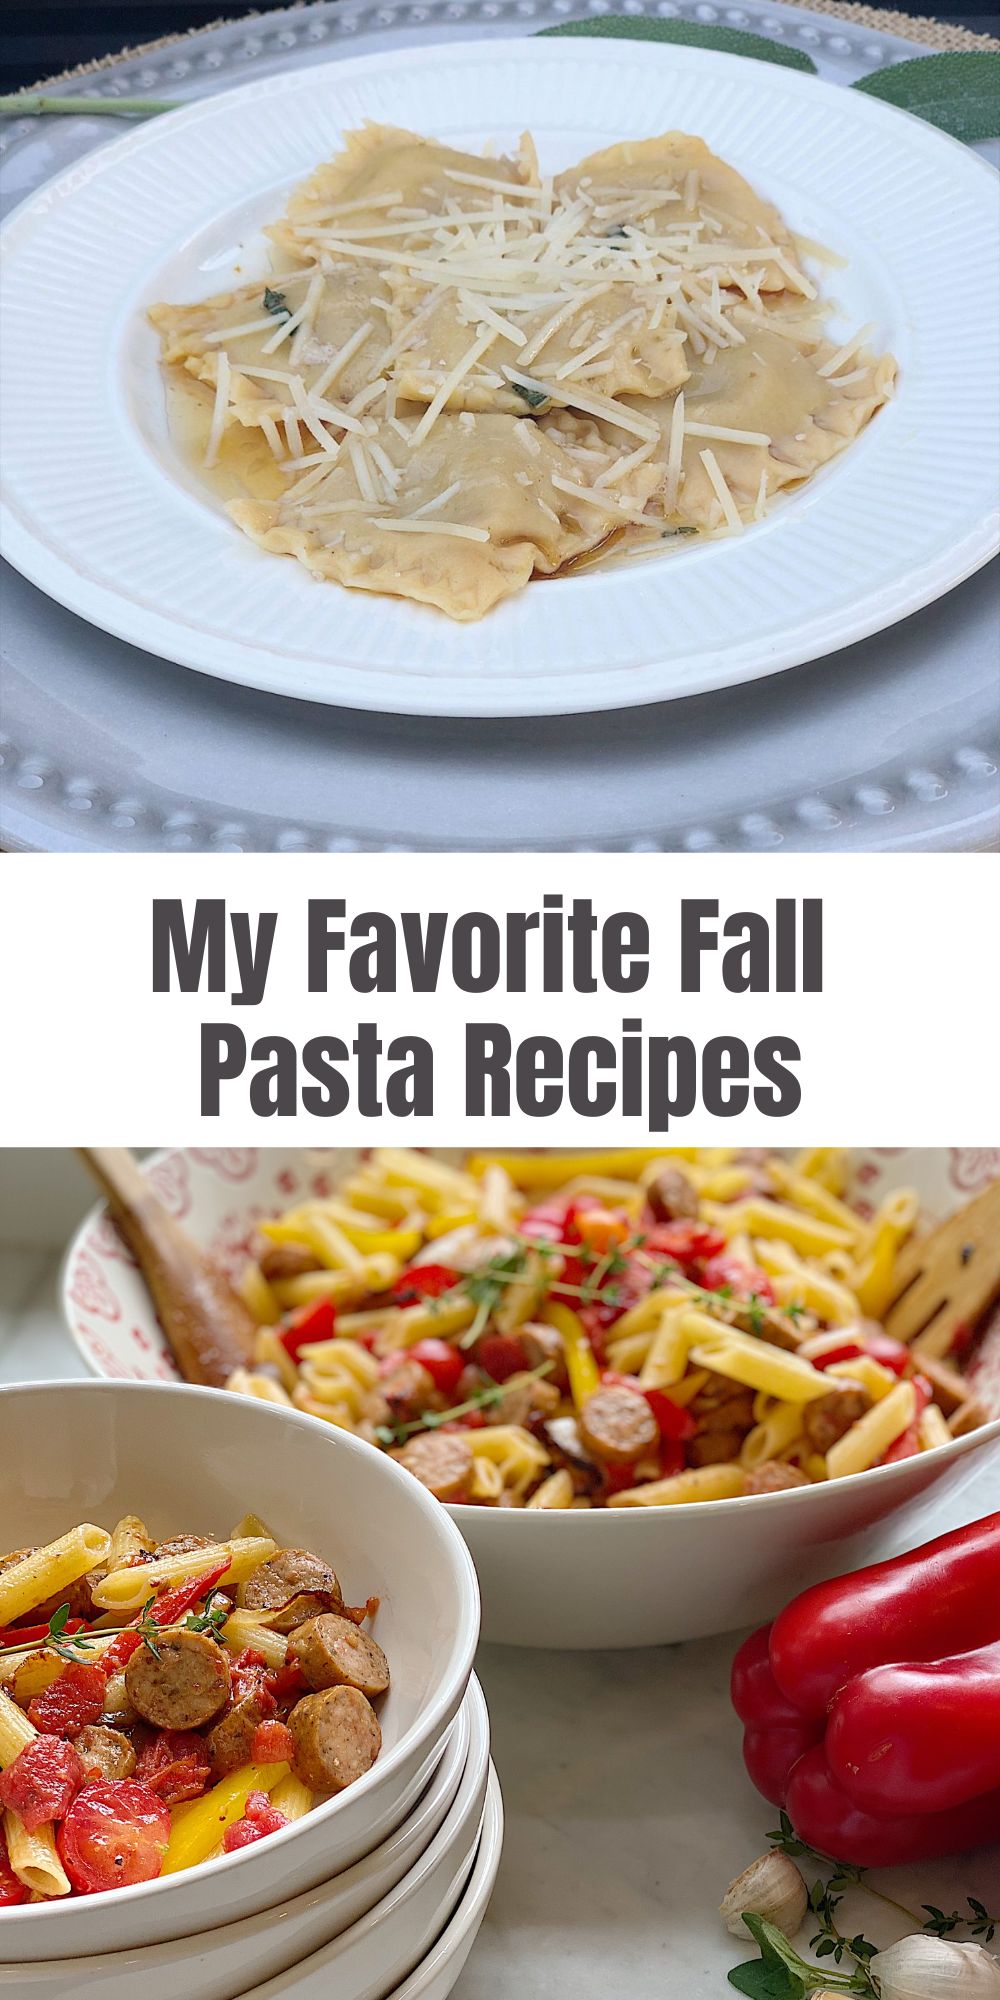 Pasta is one of my favorite things to both make and eat. Today, I am sharing some of my favorite fall pasta recipes.